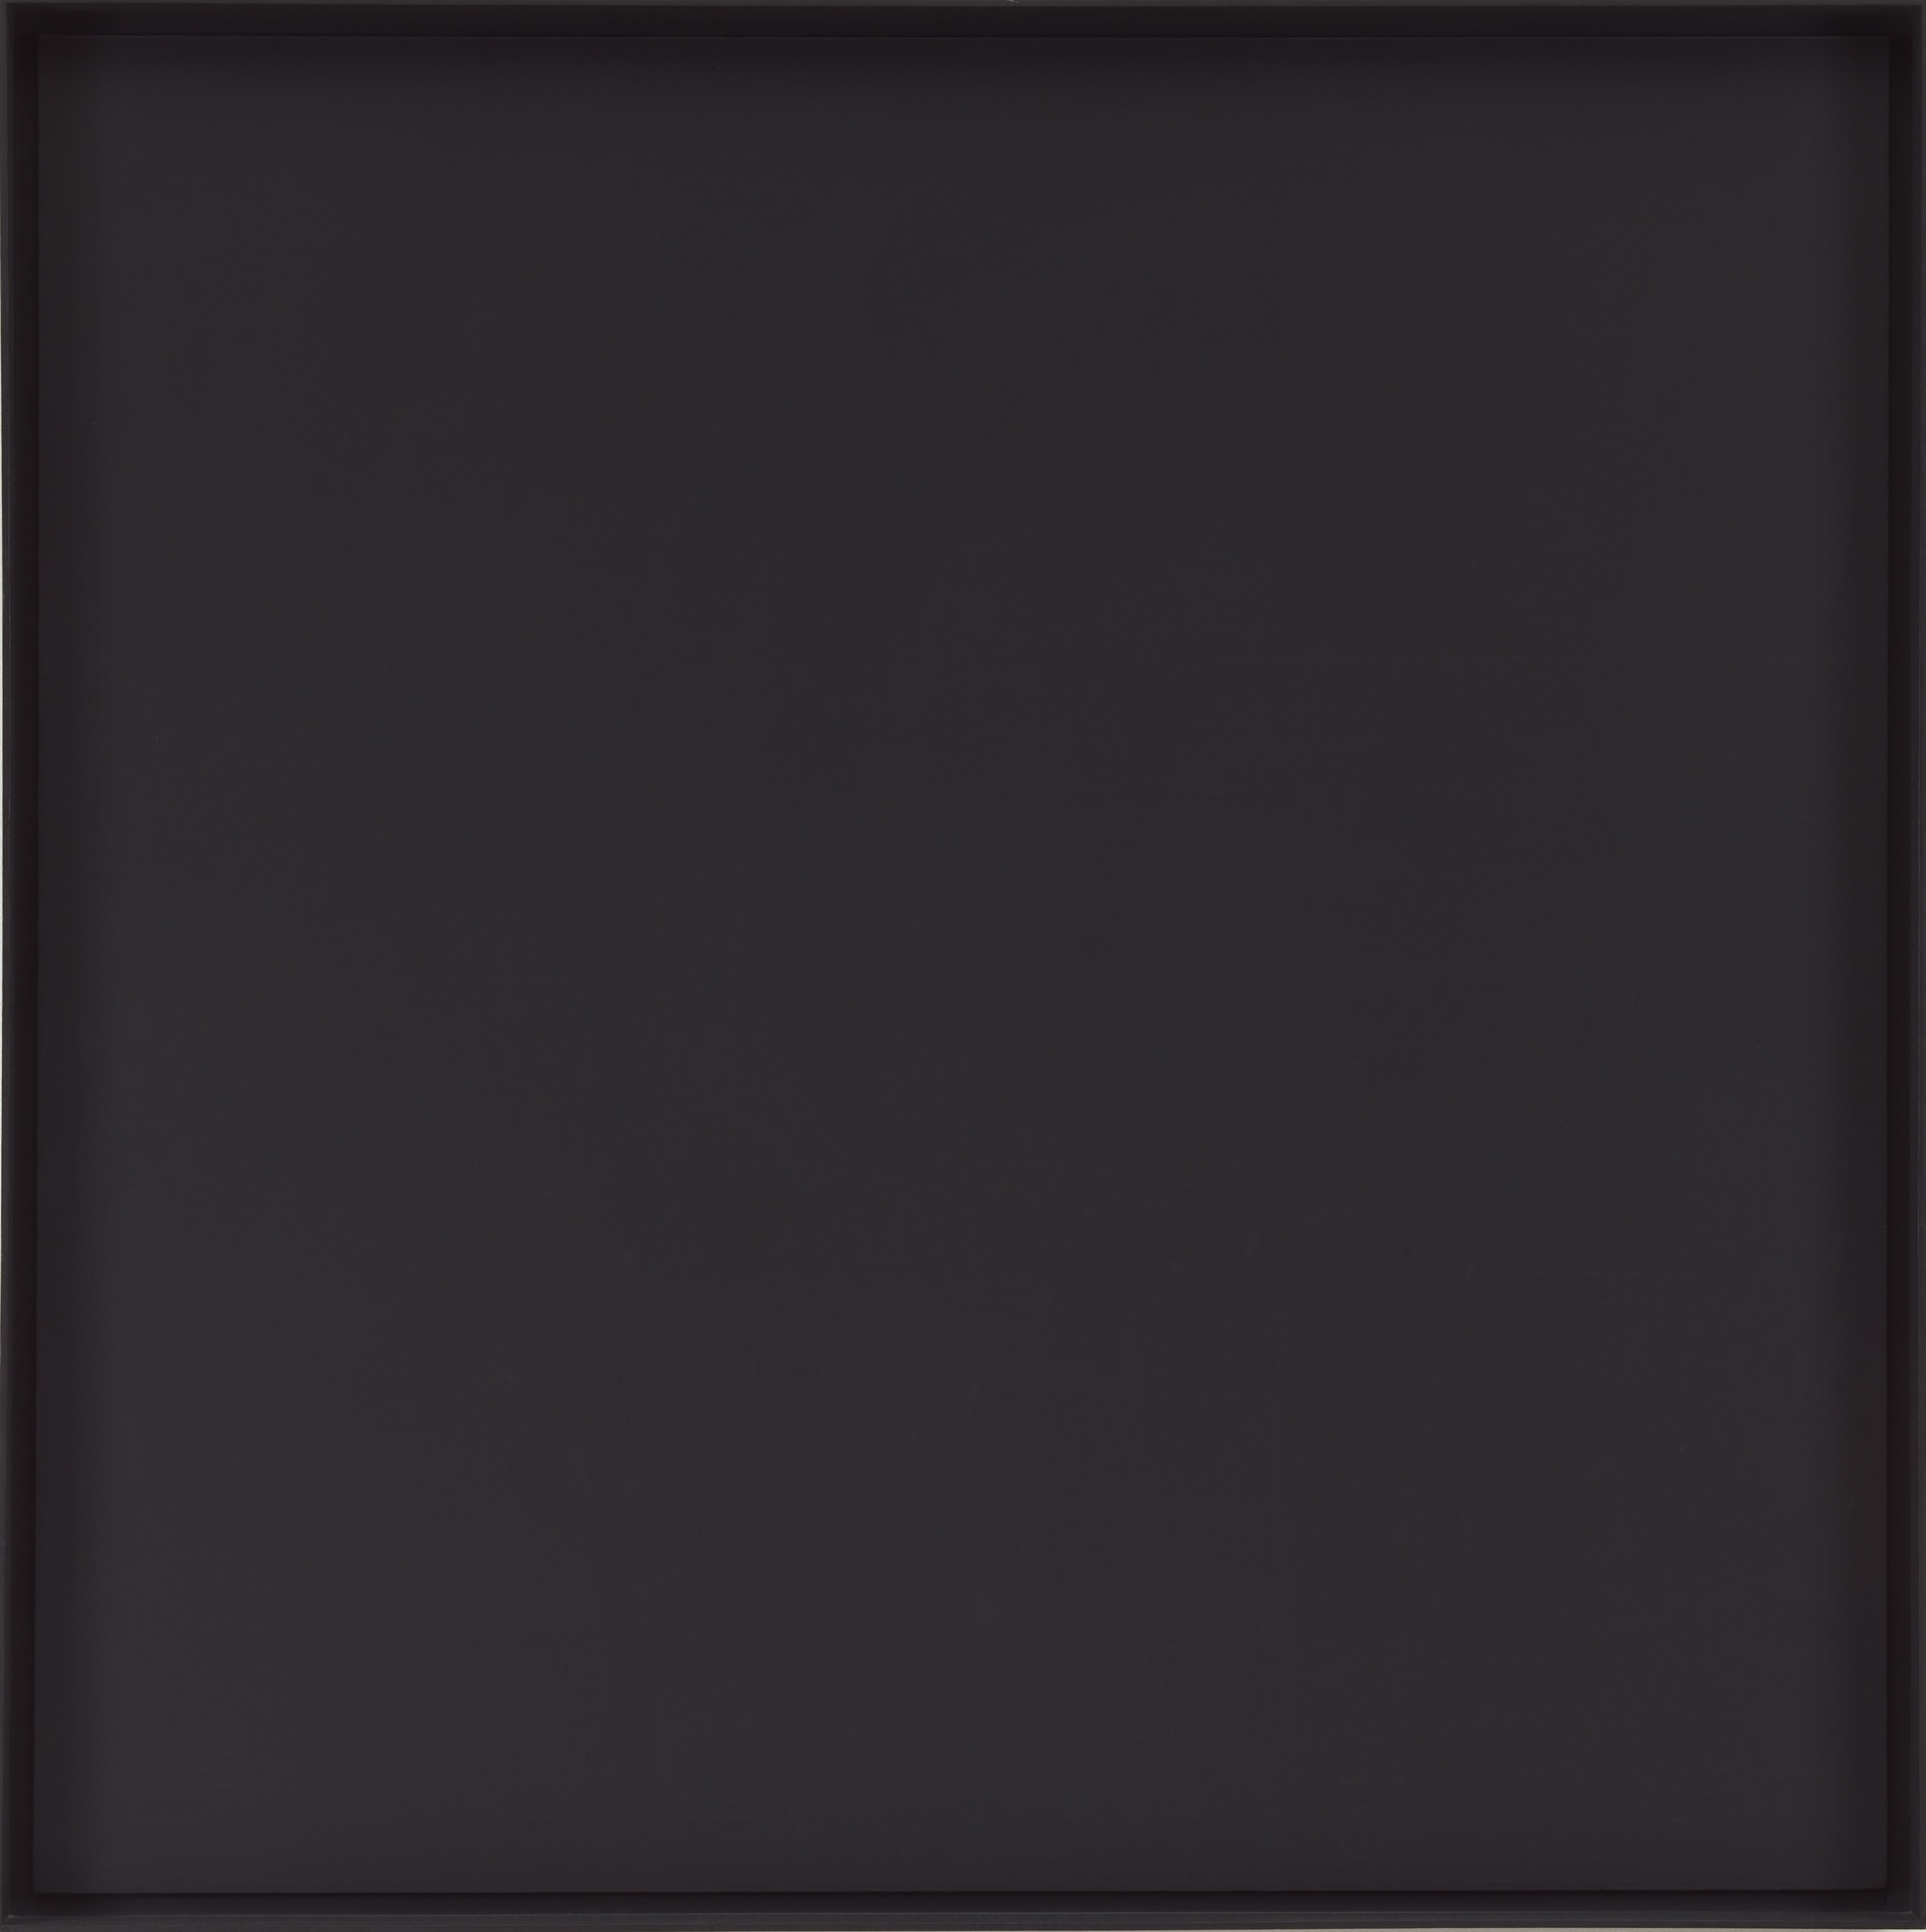 Ad Reinhardt's Abstract Painting, 1963